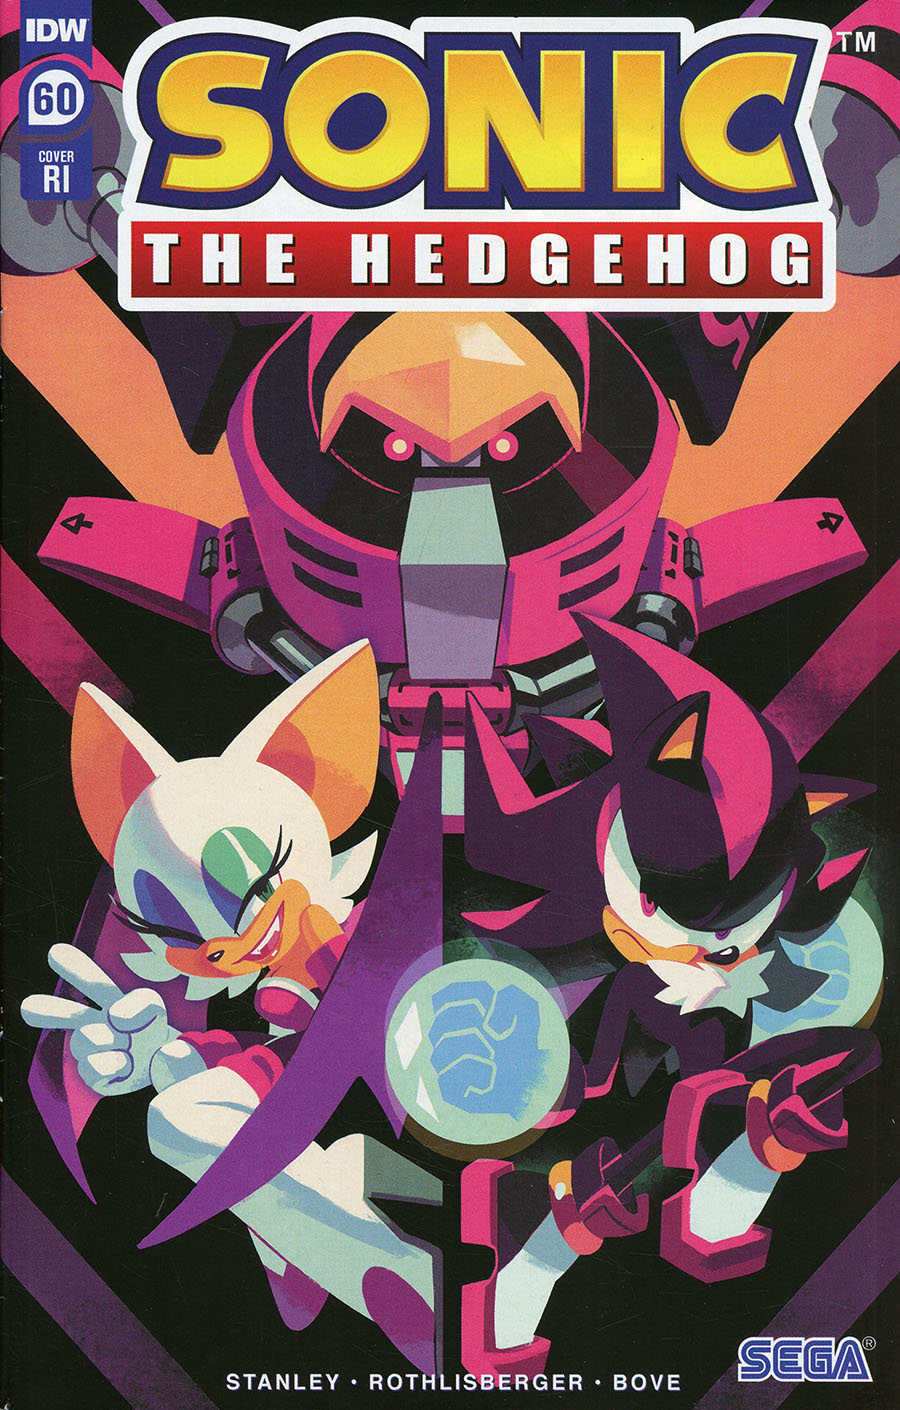 Sonic The Hedgehog Vol 3 #60 Cover C Incentive Nathalie Fourdraine Variant Cover